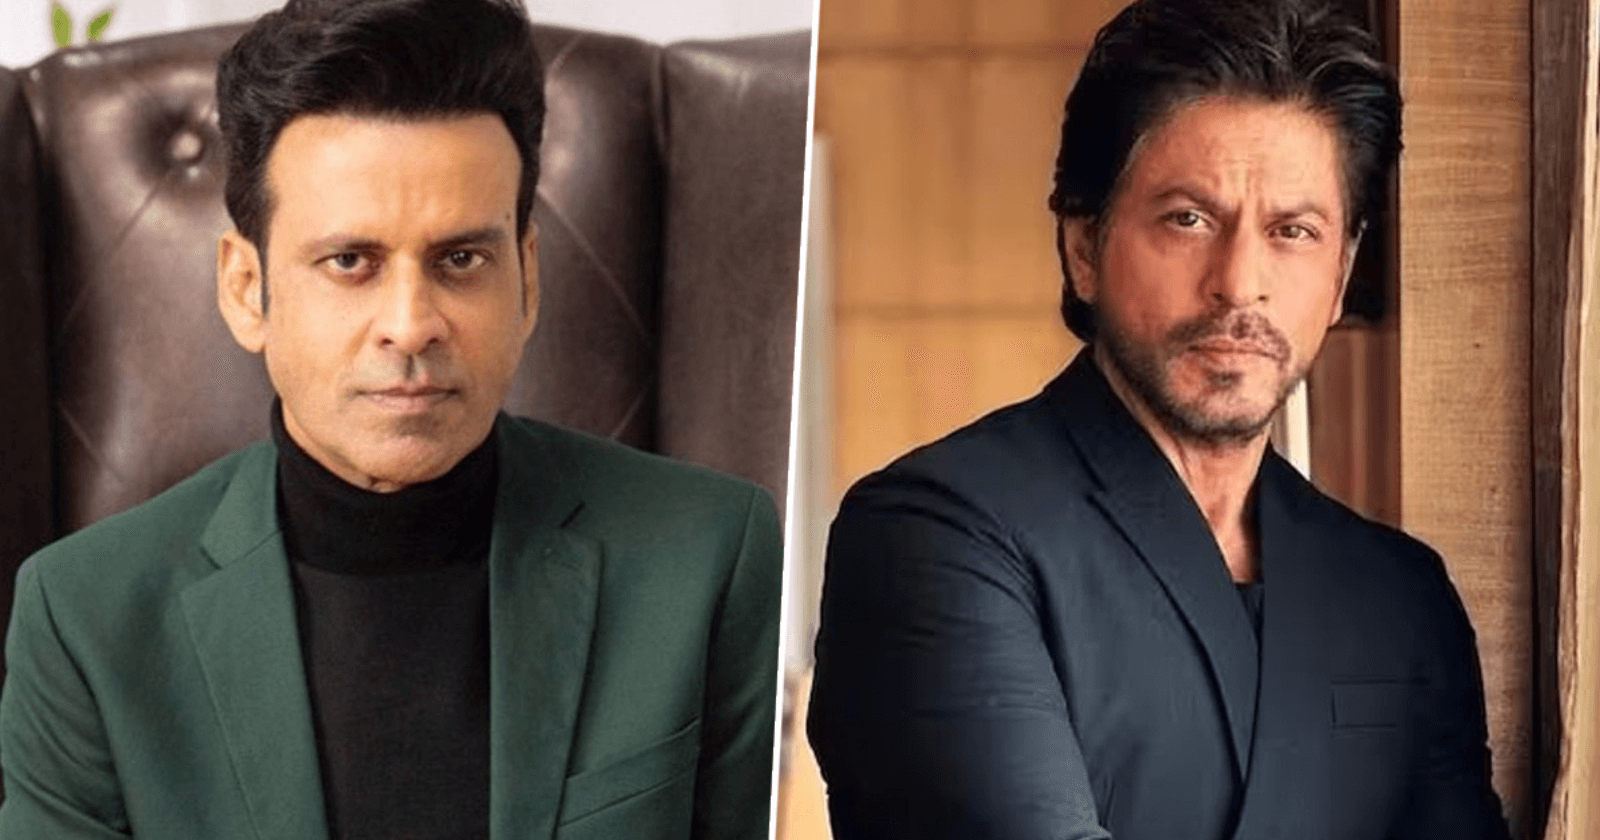 Manoj Bajpayee Reveals He And Shah Rukh Khan Were Never Close Rarely Intersect Paths Now